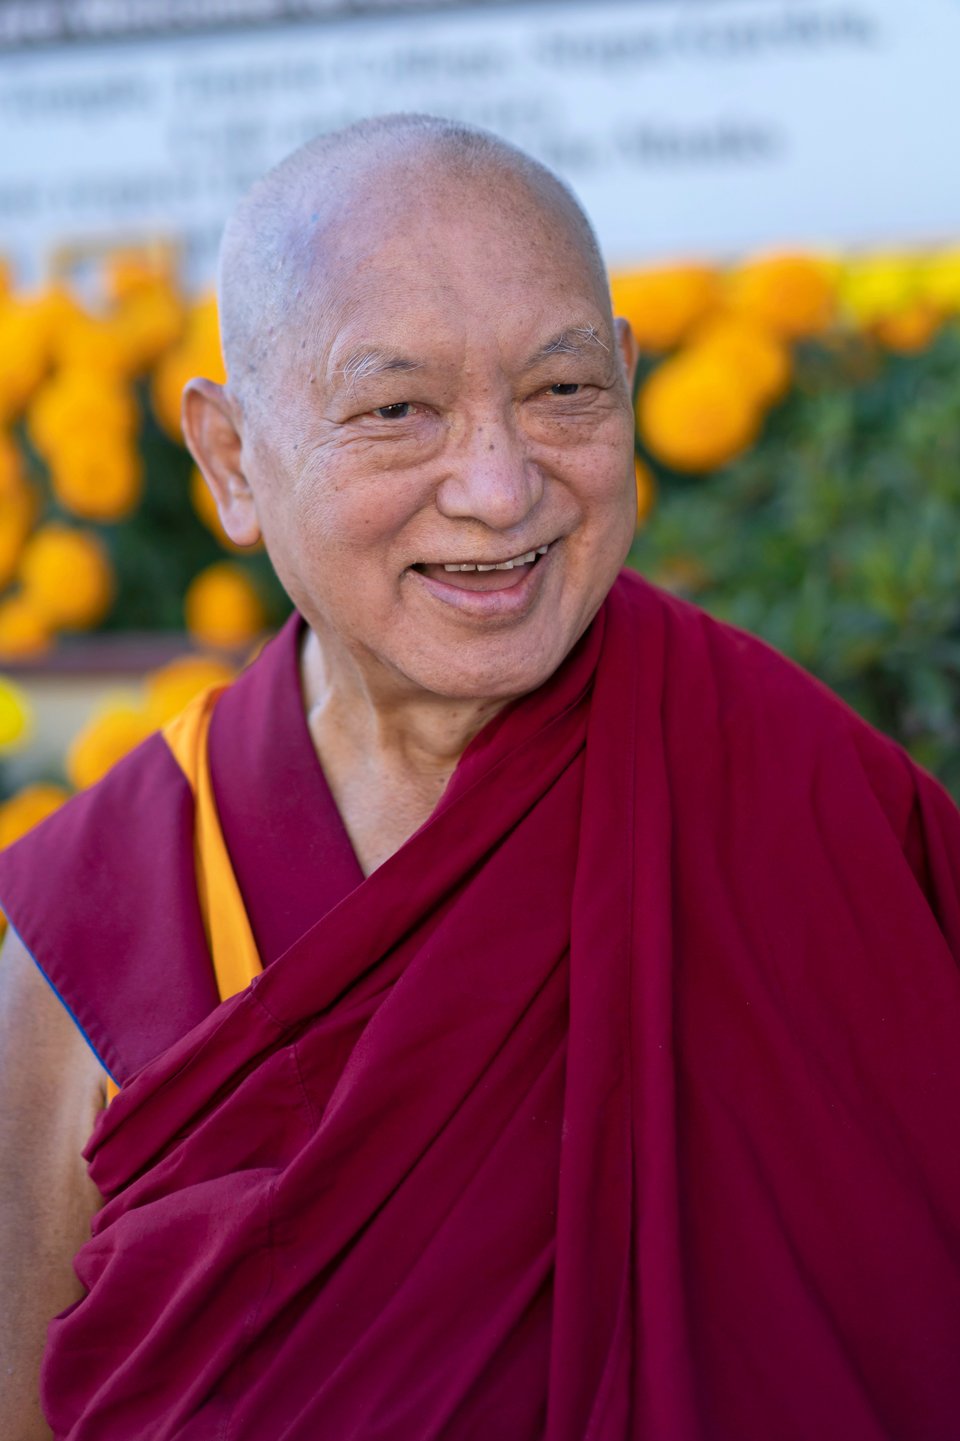 Lama Zopa Rinpoche smiling outside with blooming marigolds behind hime